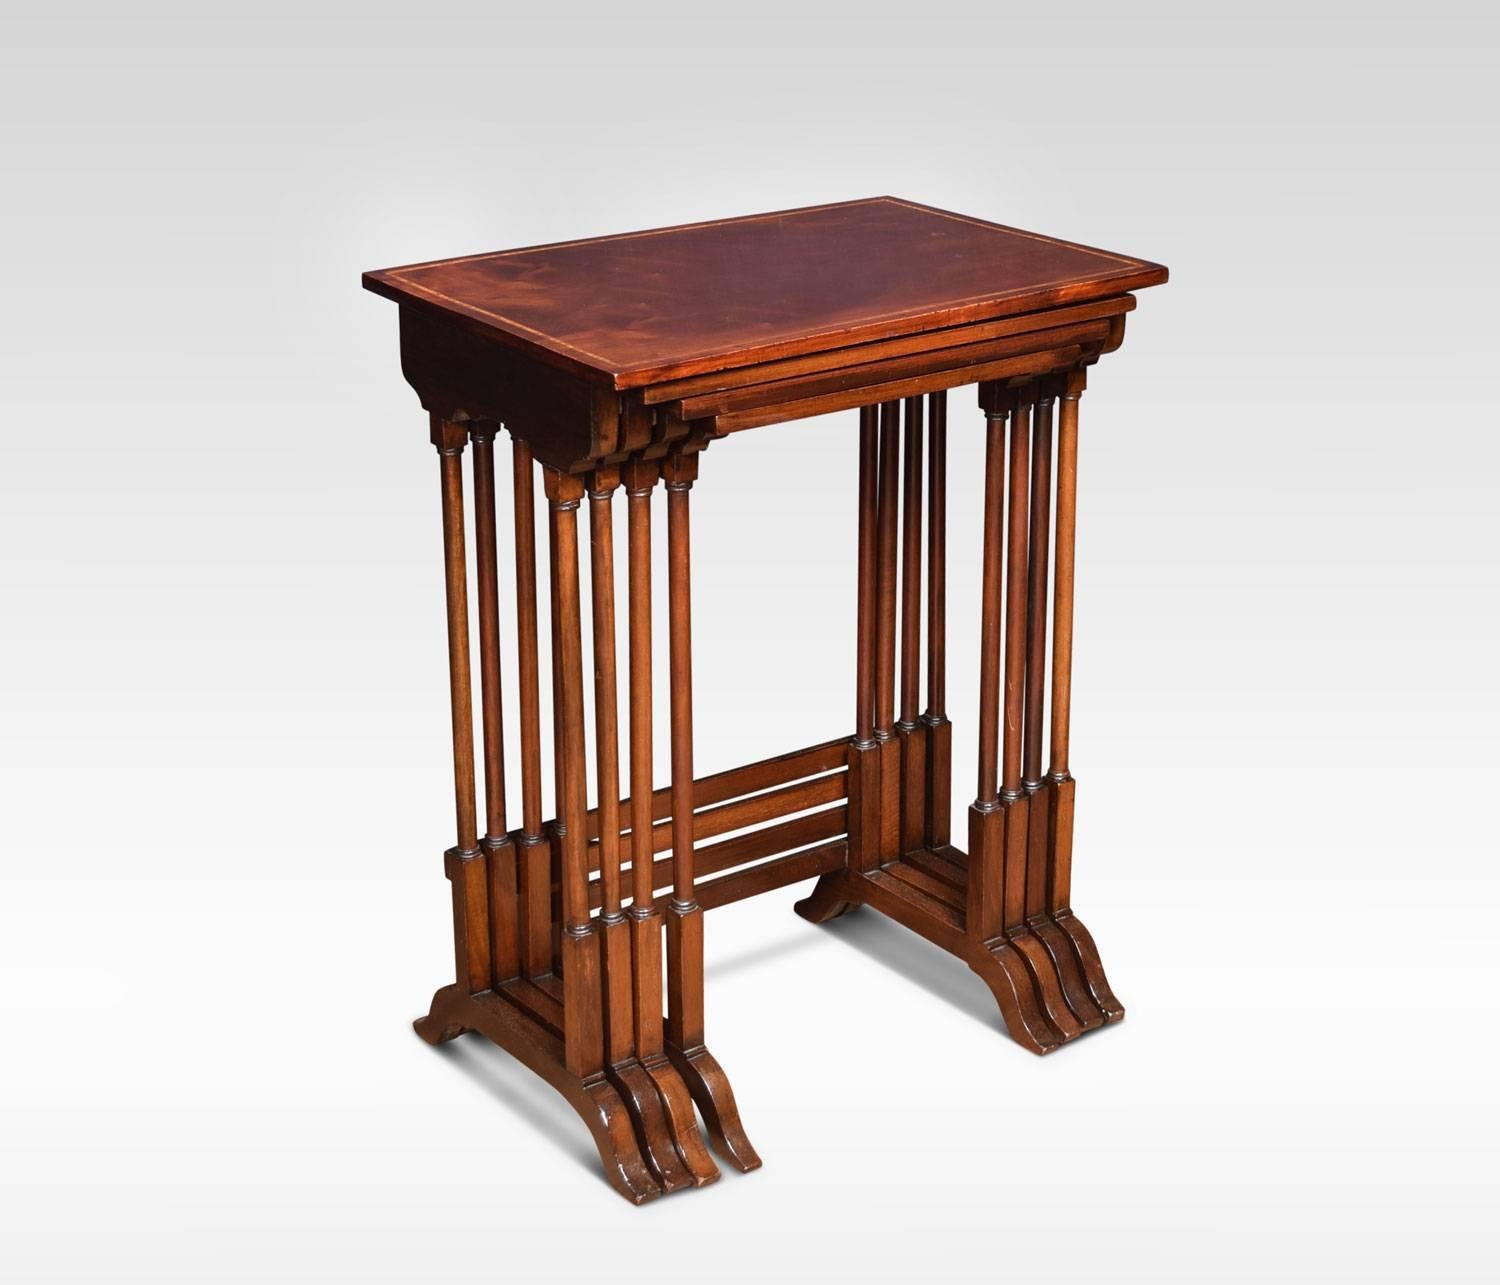 Nest of four mahogany tables, the rectangular moulded tops with satinwood inlaid boarder, raised on slender turned tapered supports terminating in splayed feet.
Dimensions:
Height 28 inches
Width 22 inches
Depth 15 inches.